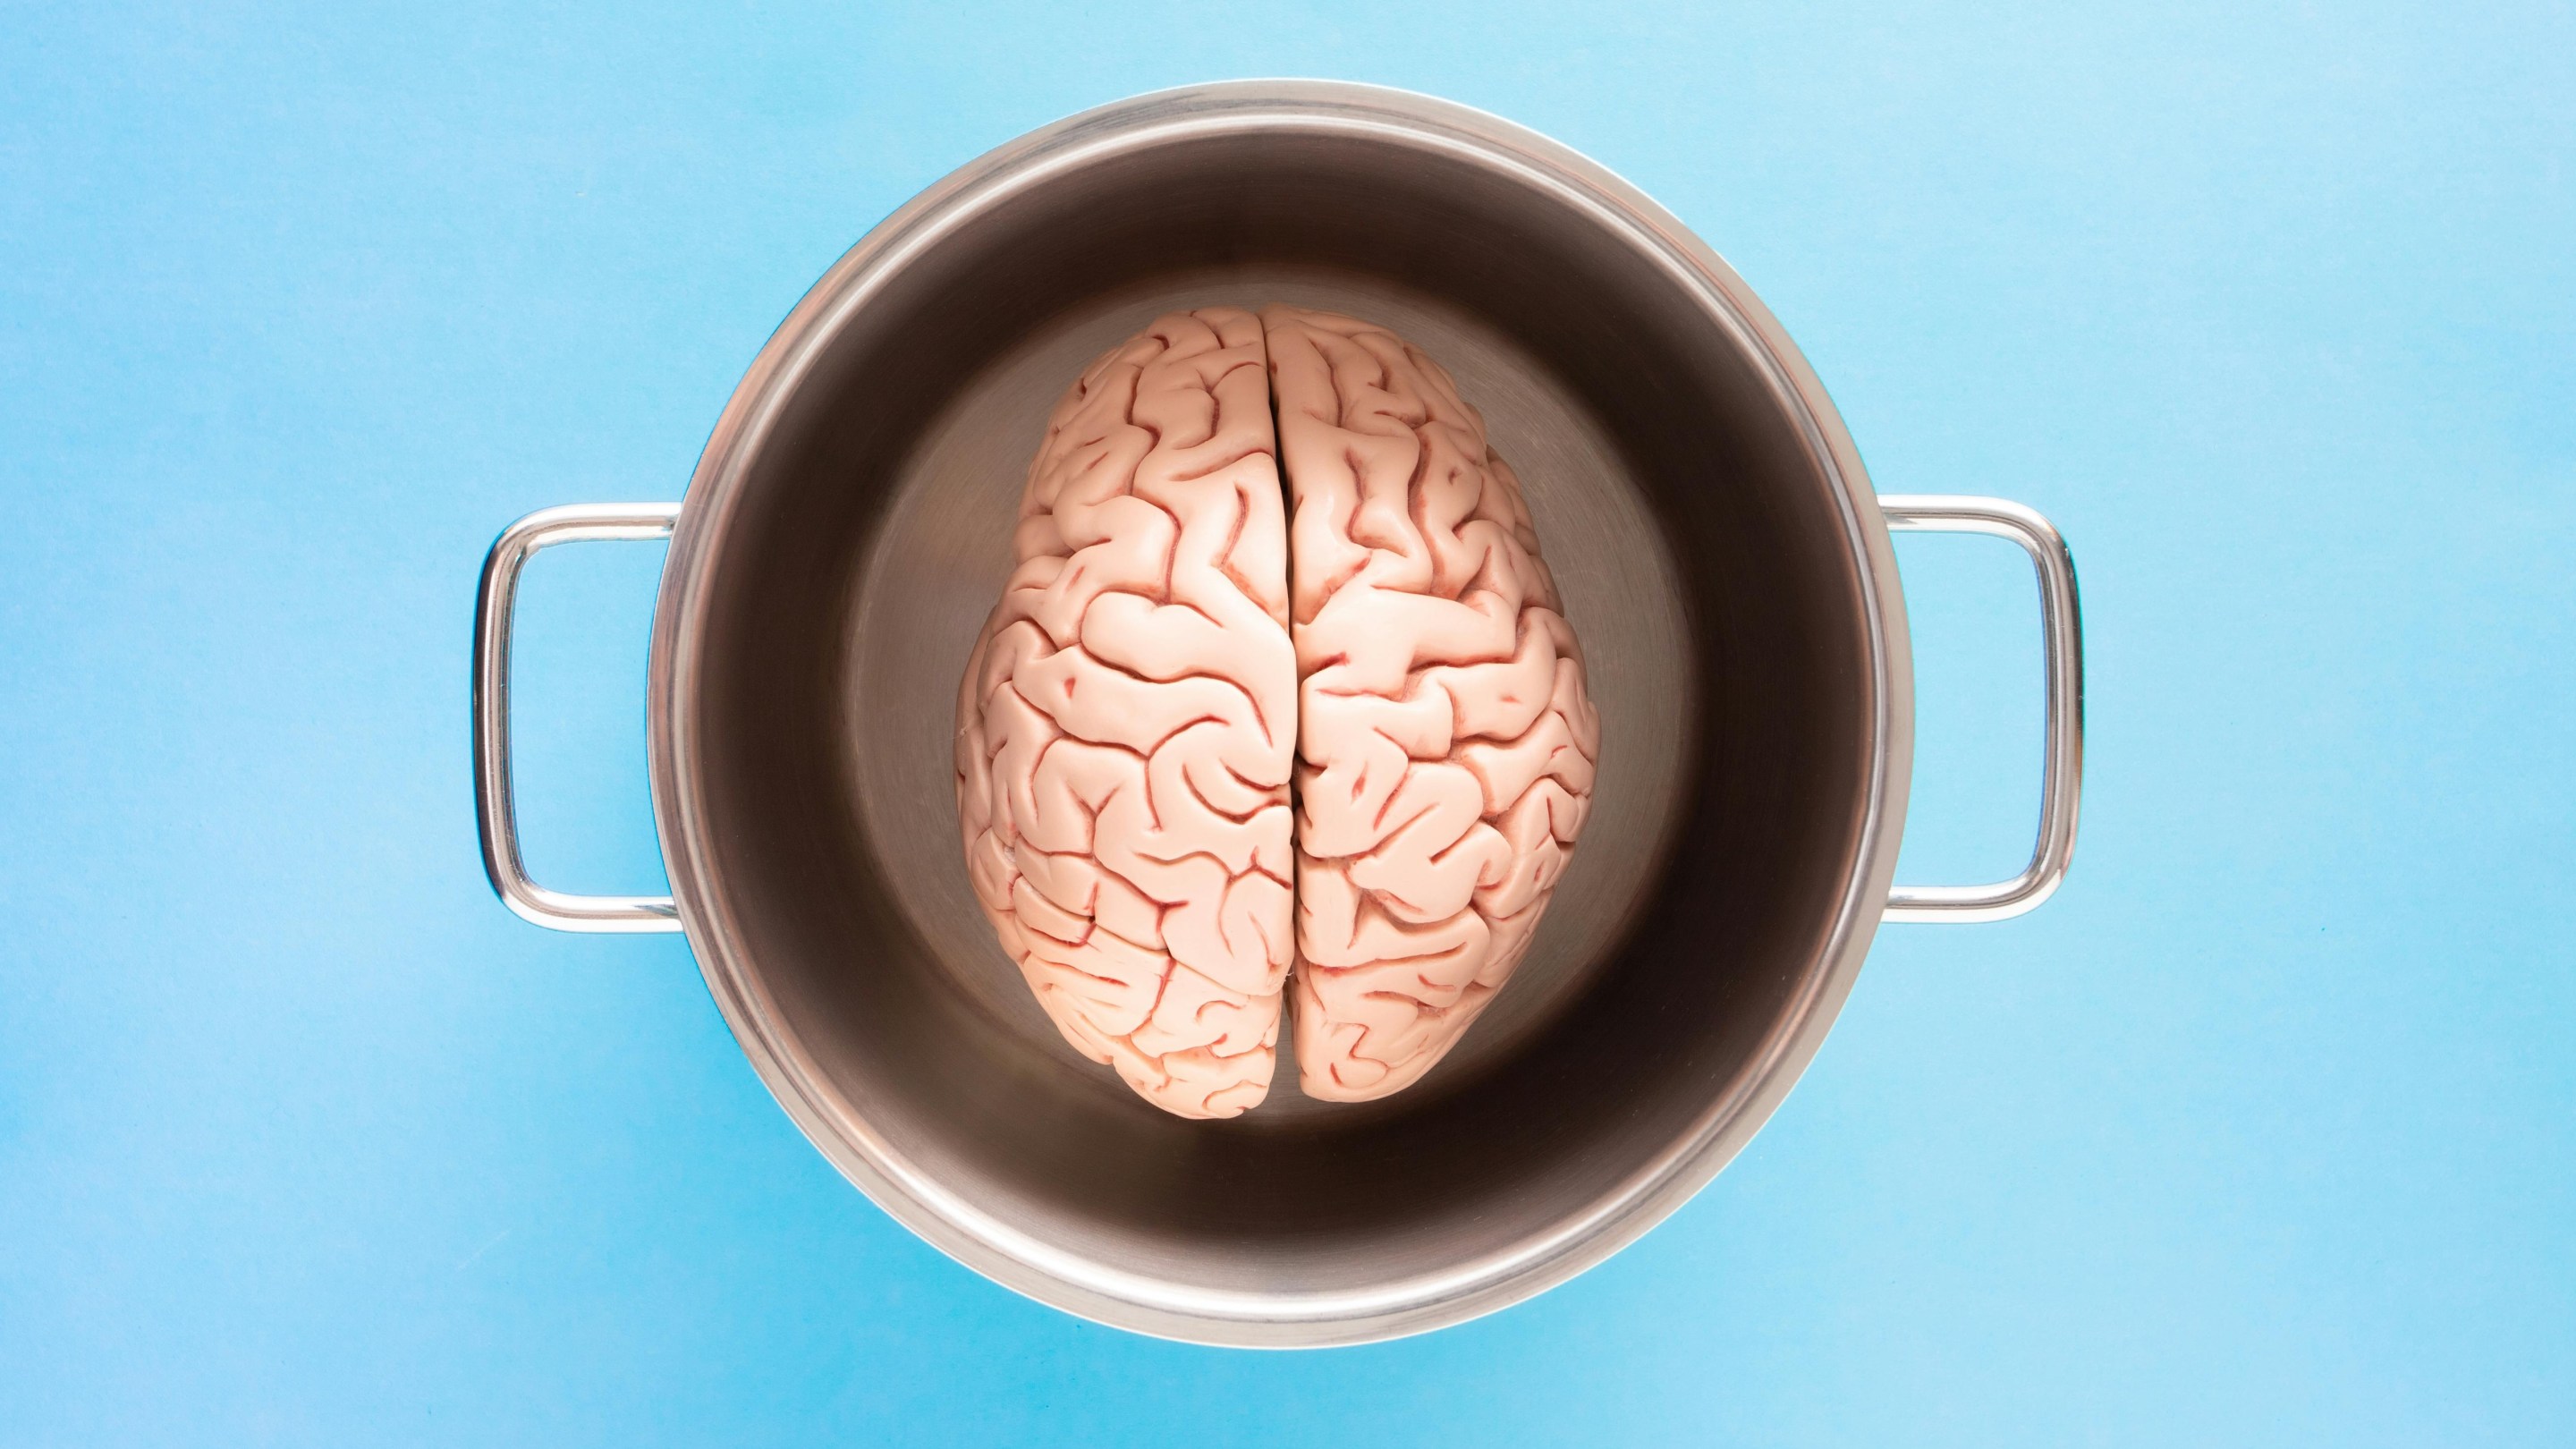 A brain in a metal pot on a light blue background